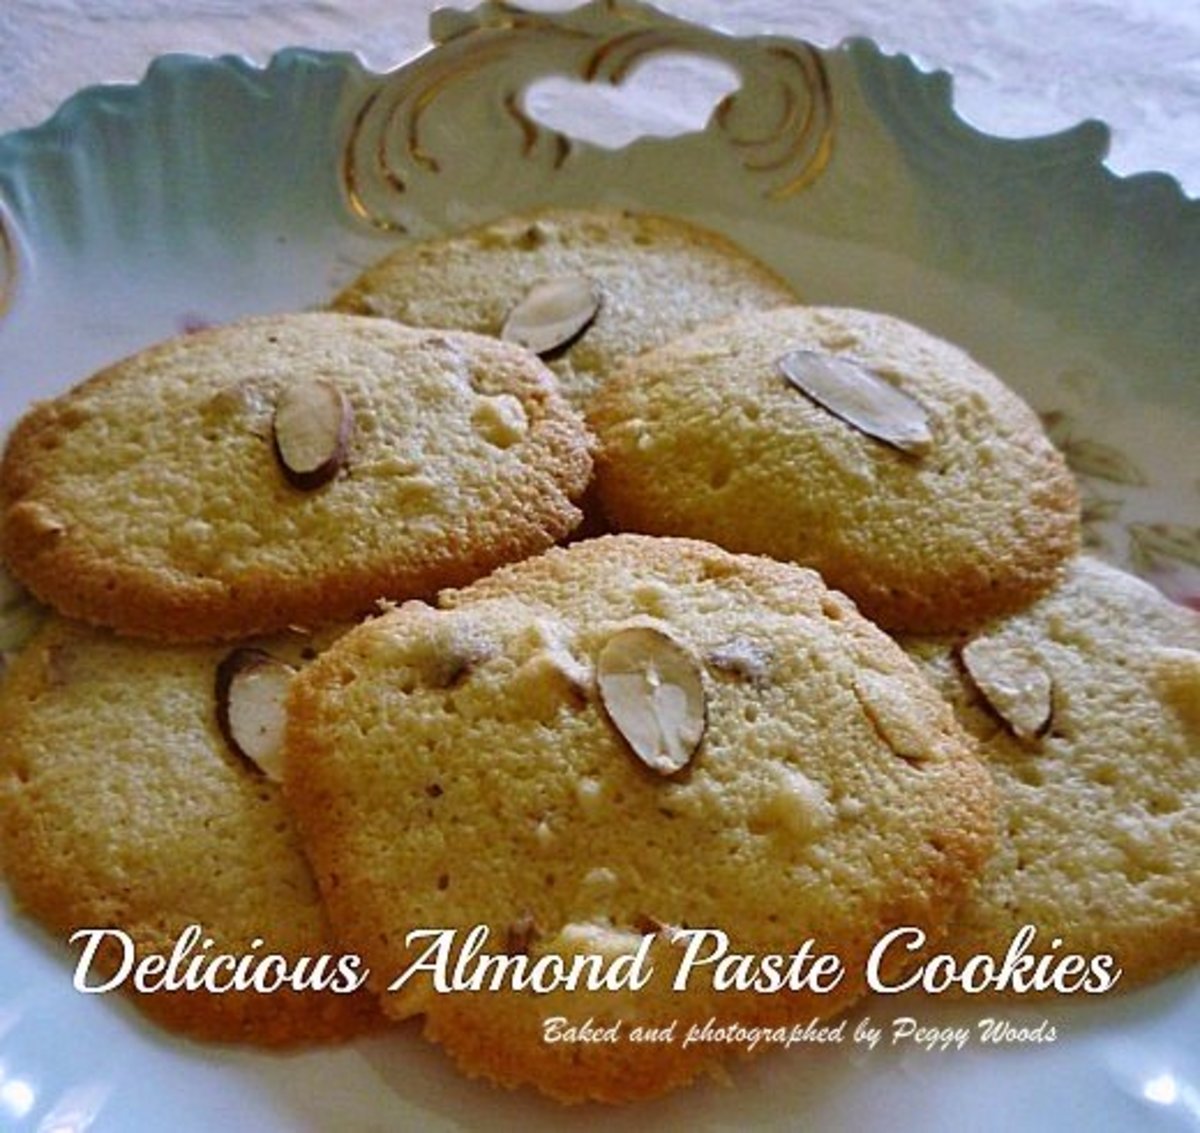 Learn how to bake irresistible almond paste cookies just like my mother-in-law used to make.